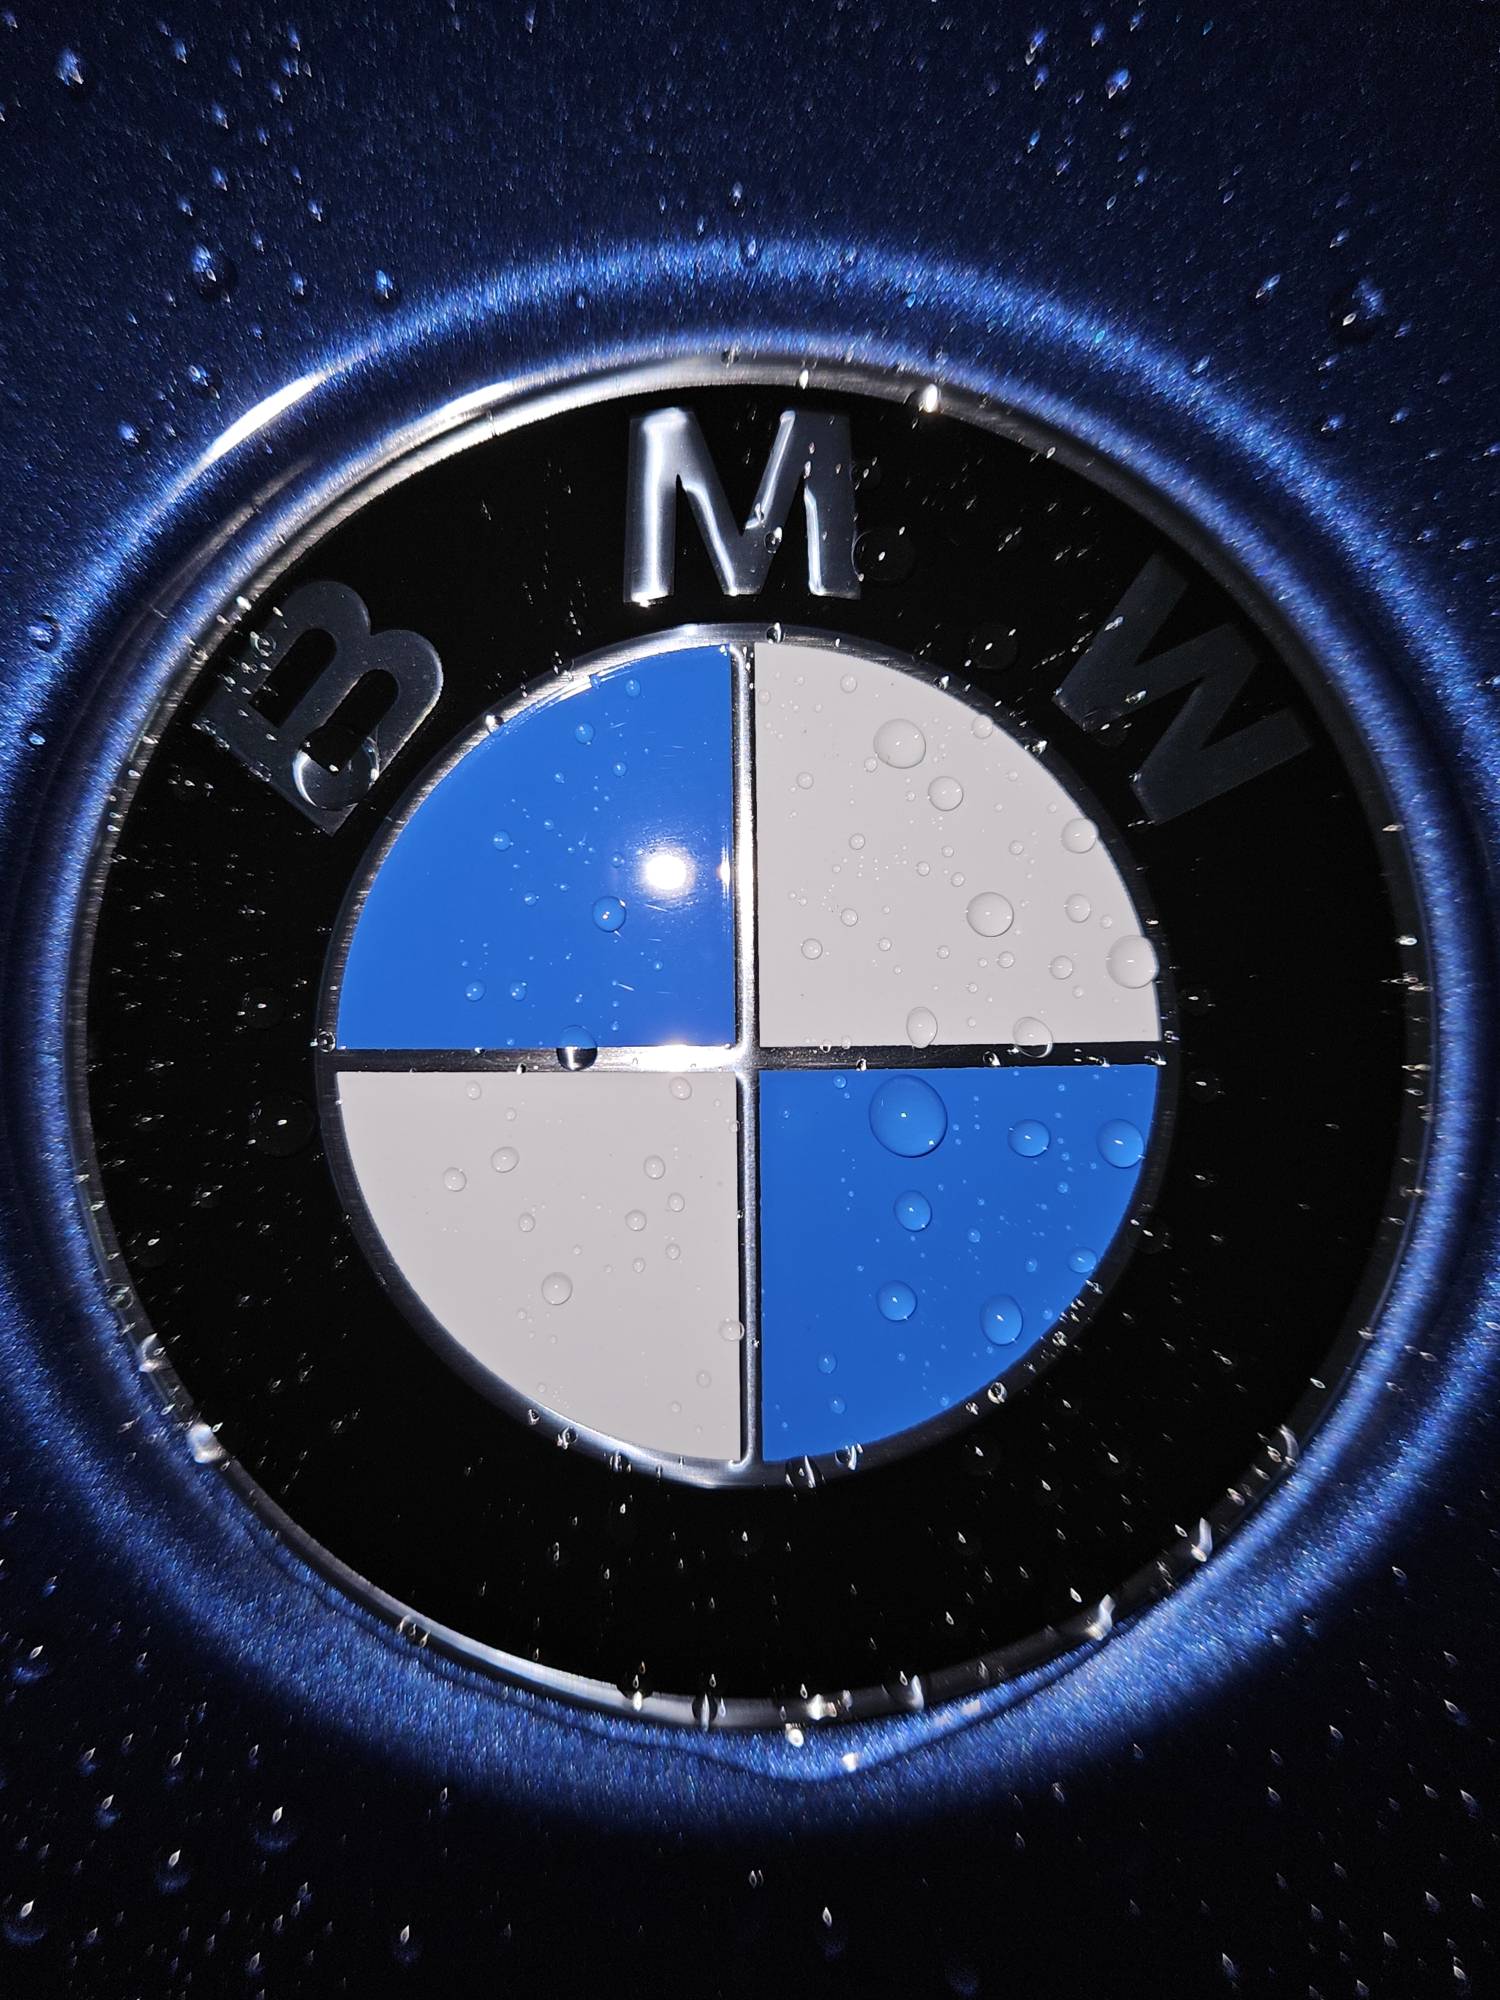 BMW Logo Wallpapers, Pictures, Images